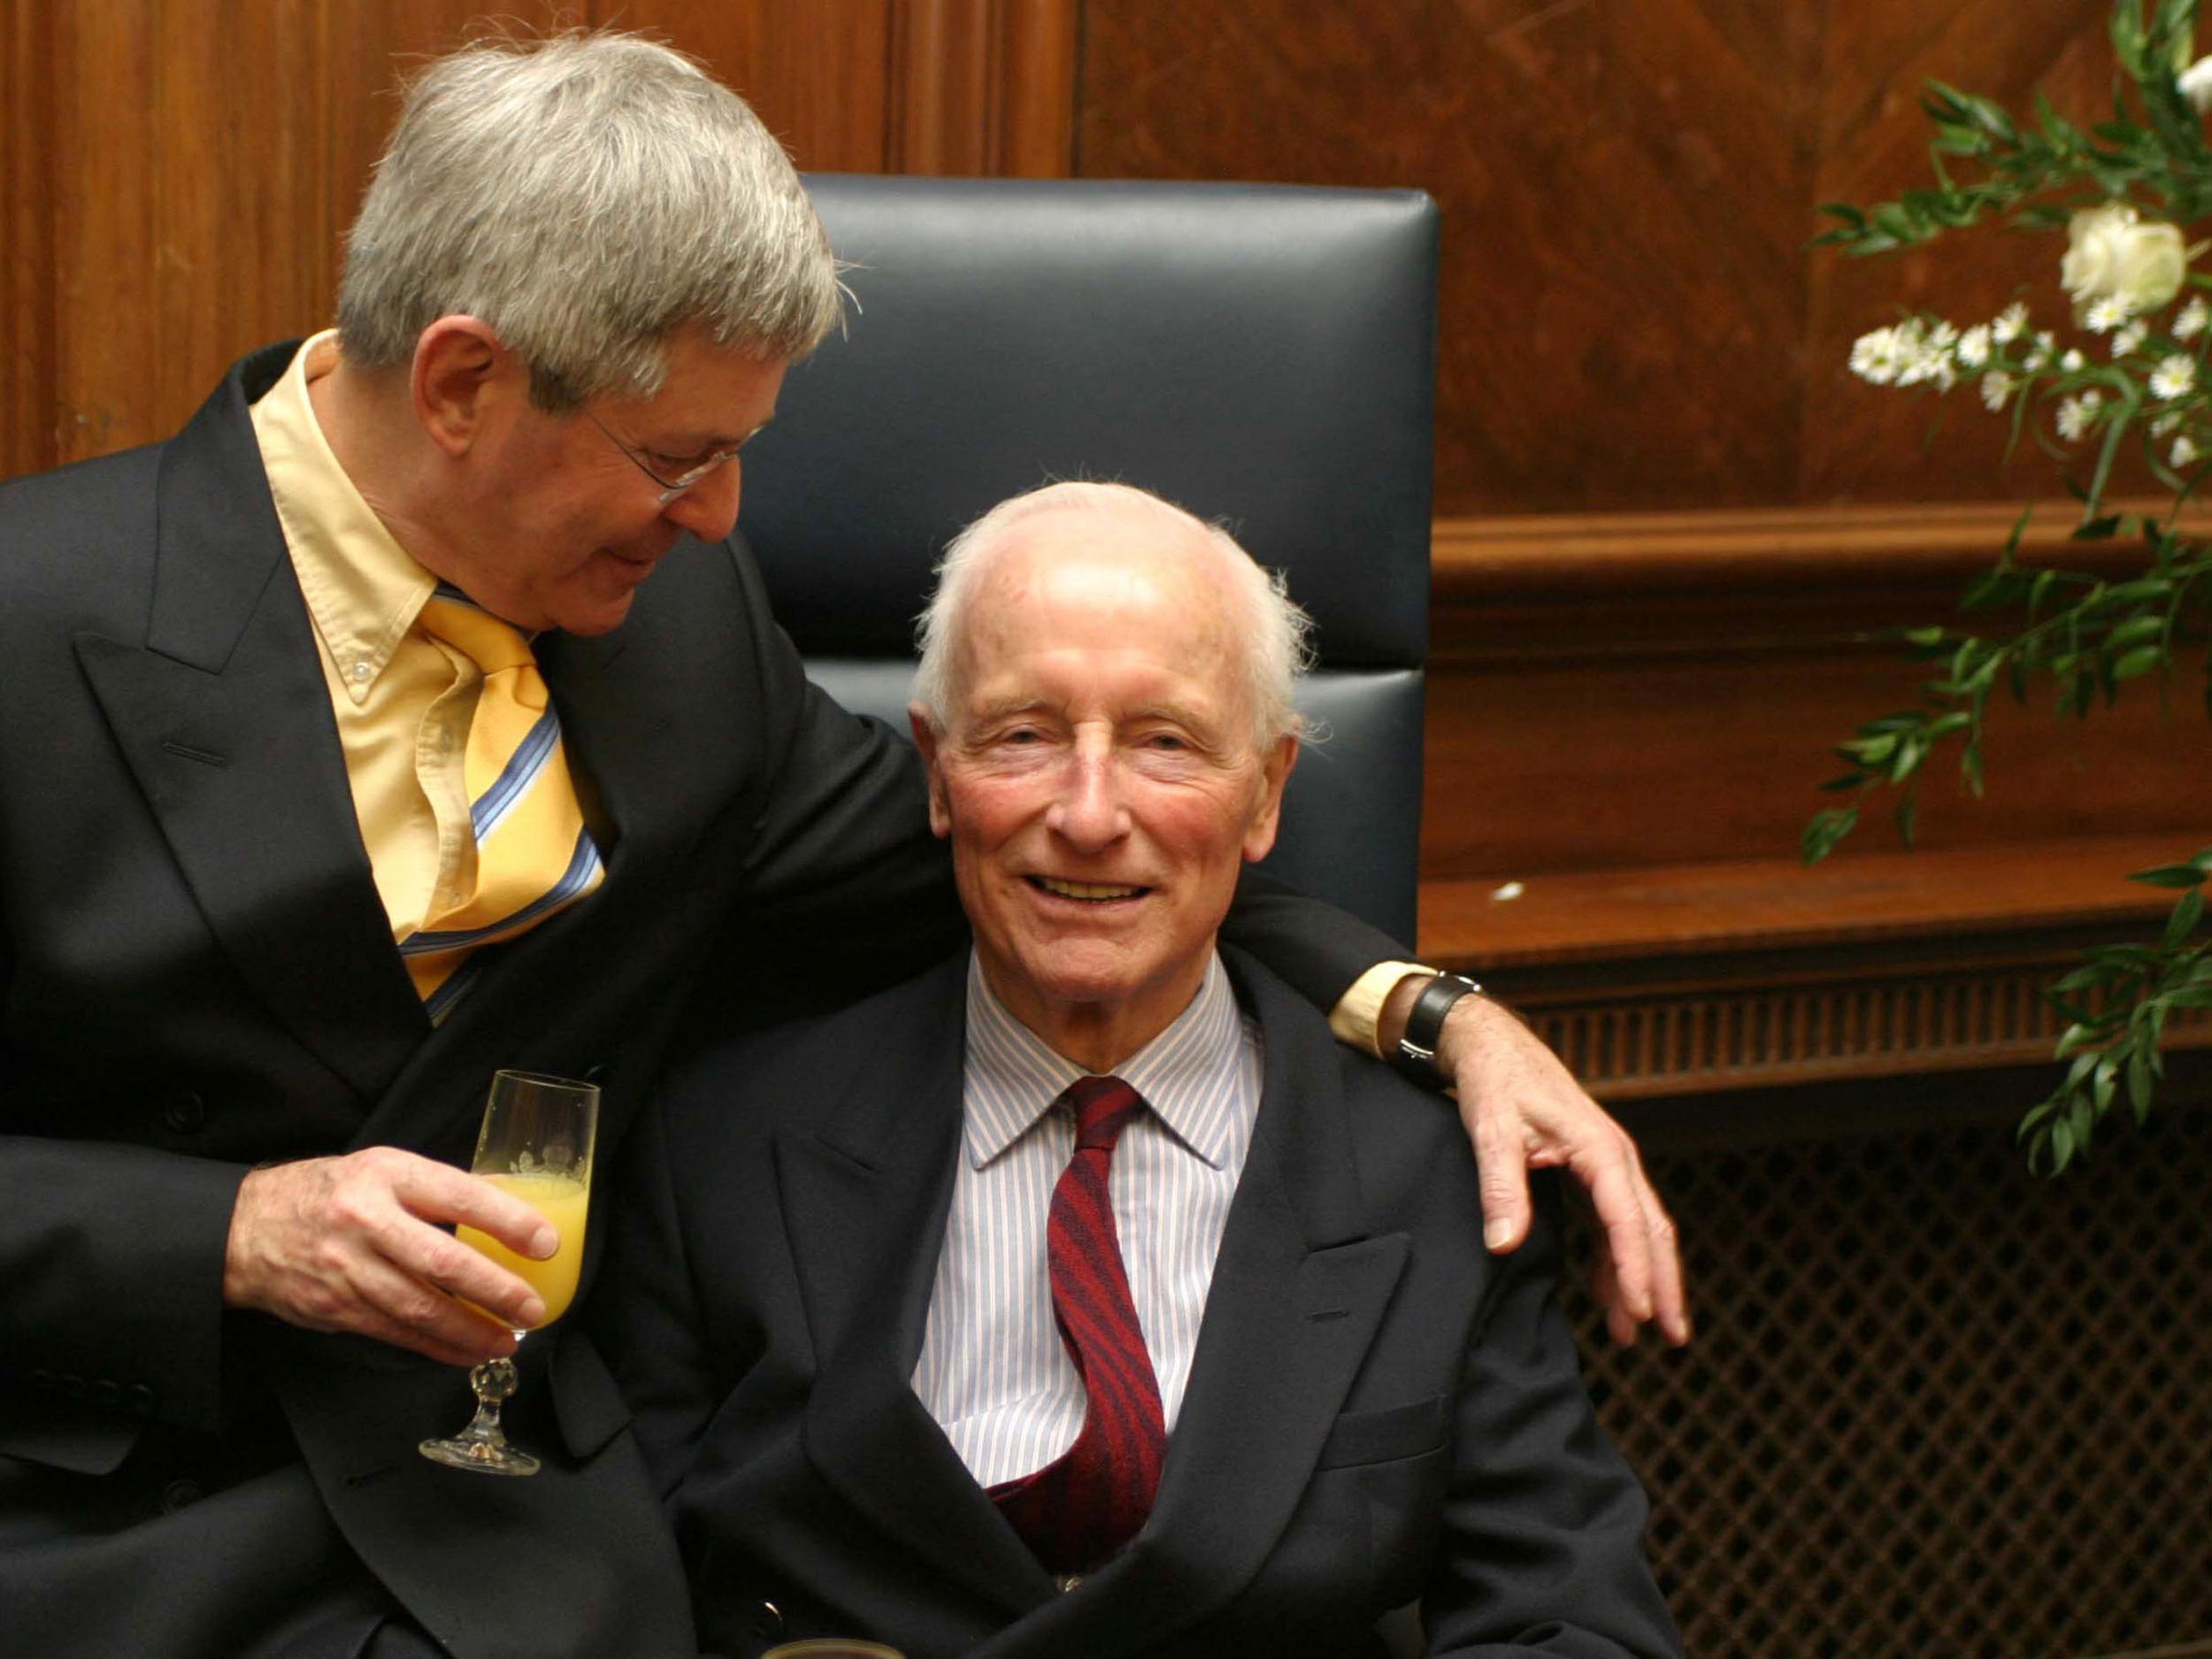 Lockyer, seated, in 2005, with his then civil partner Percy Steven